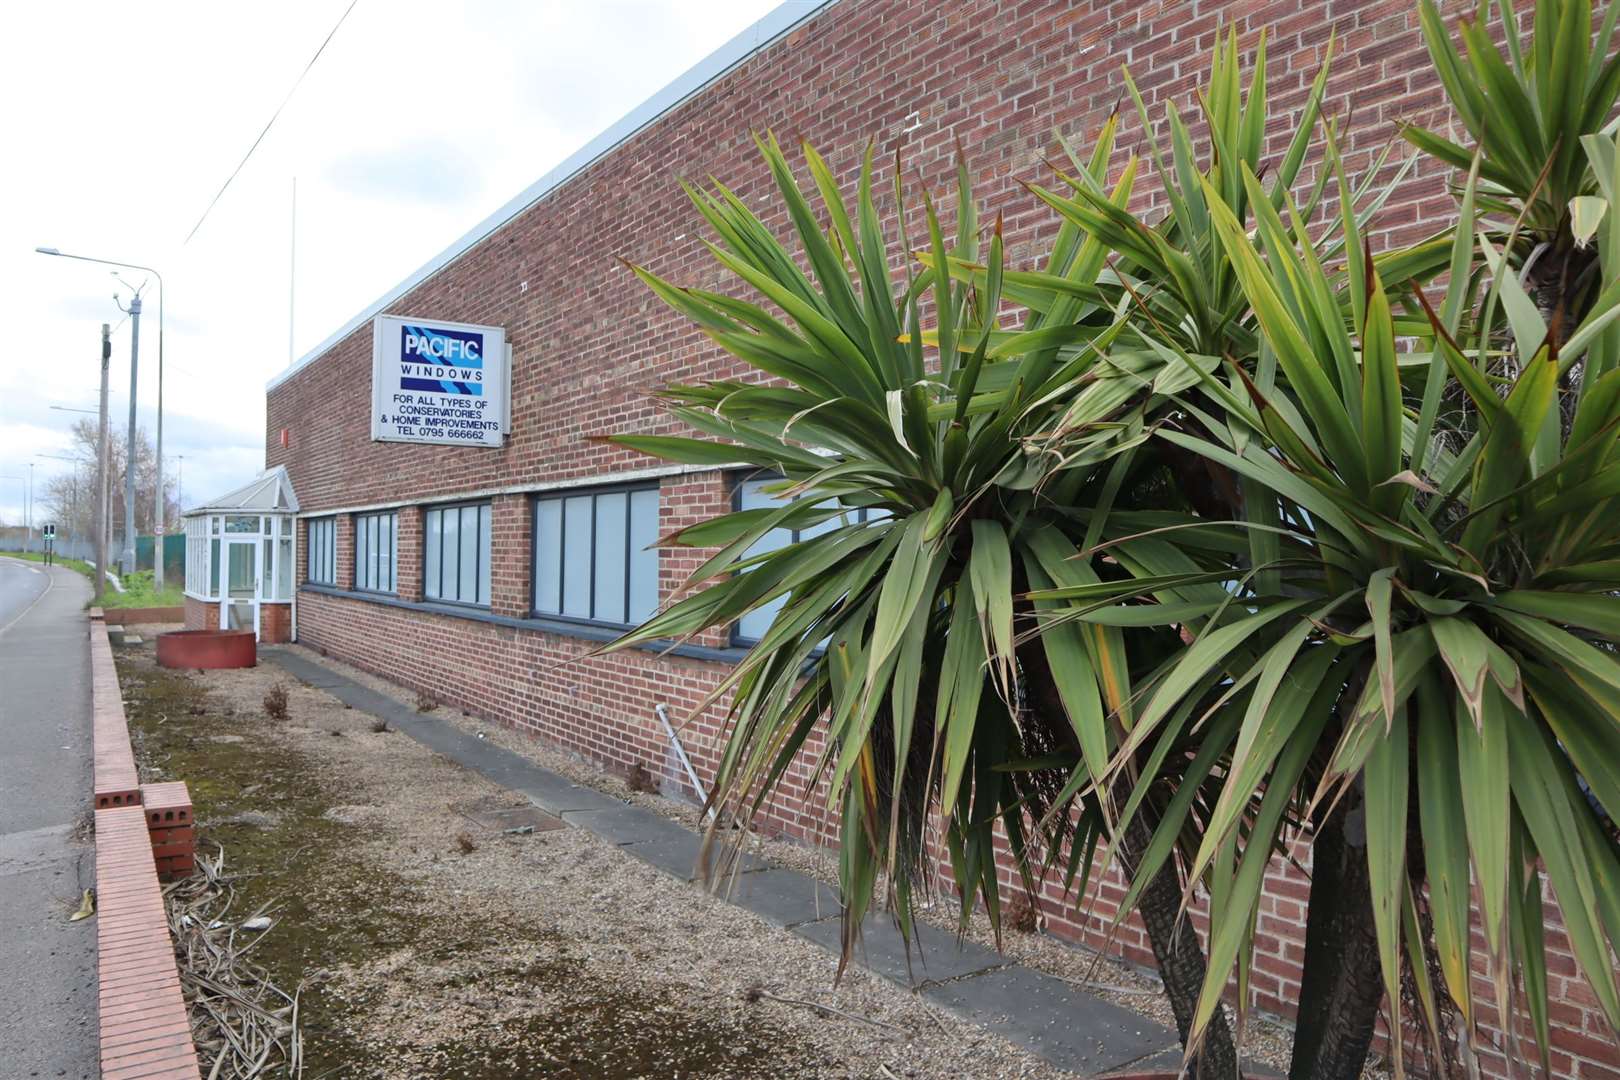 Murad's former Sheerway factory now home to Pacific double-glazing